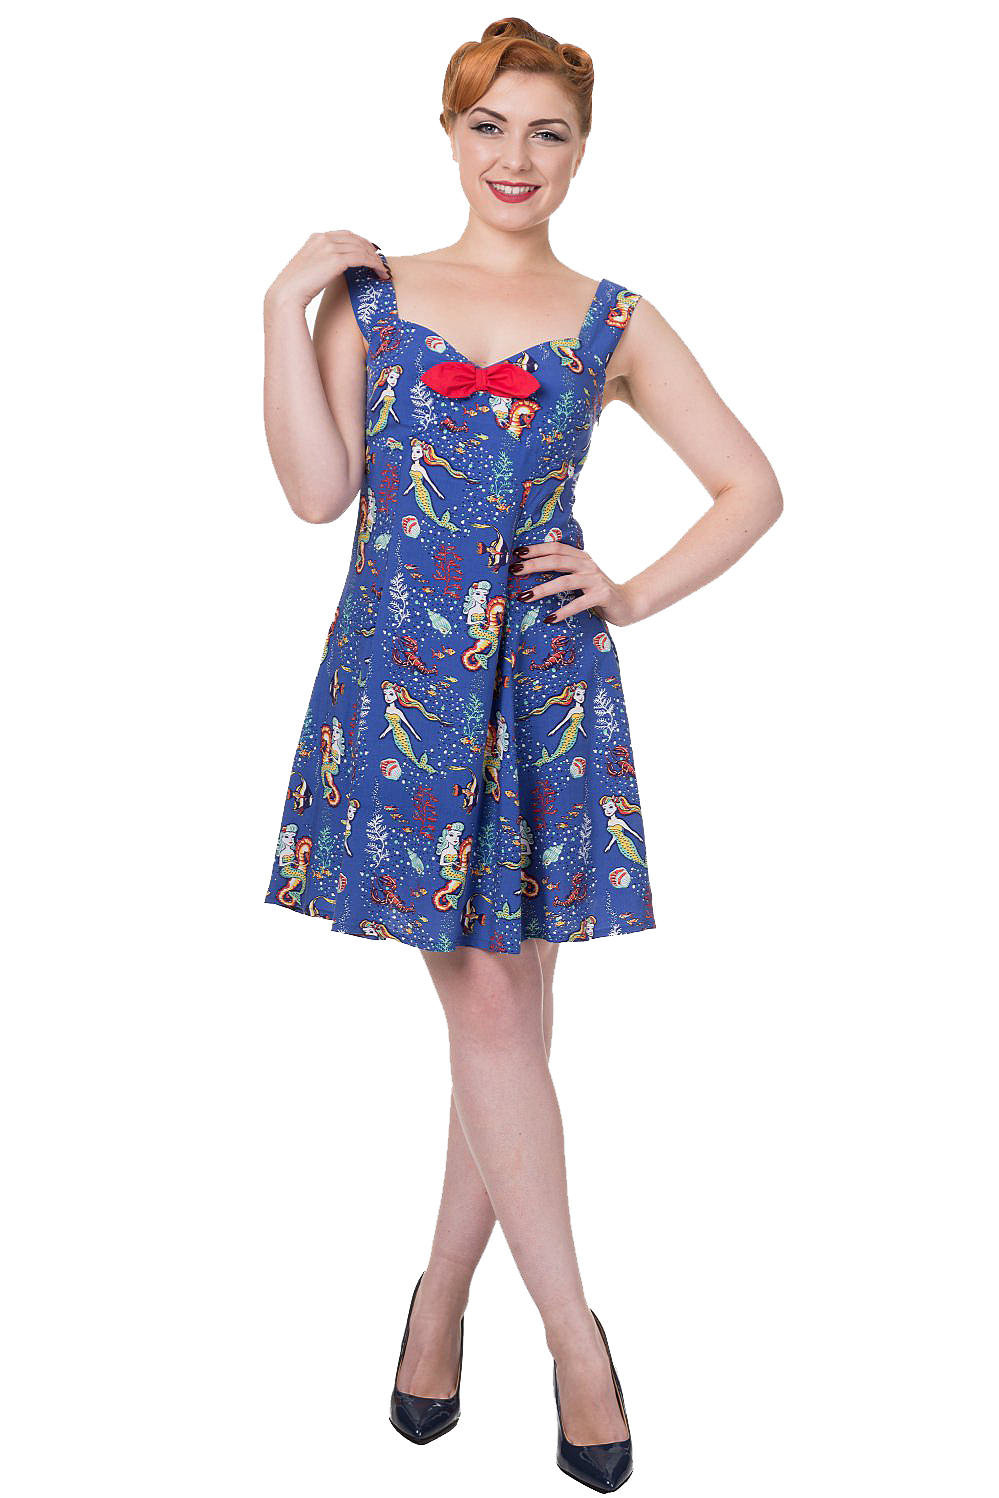 Banned Made Of Wonder Strap Dress - Retro 50s Sealife Dresses by Banned